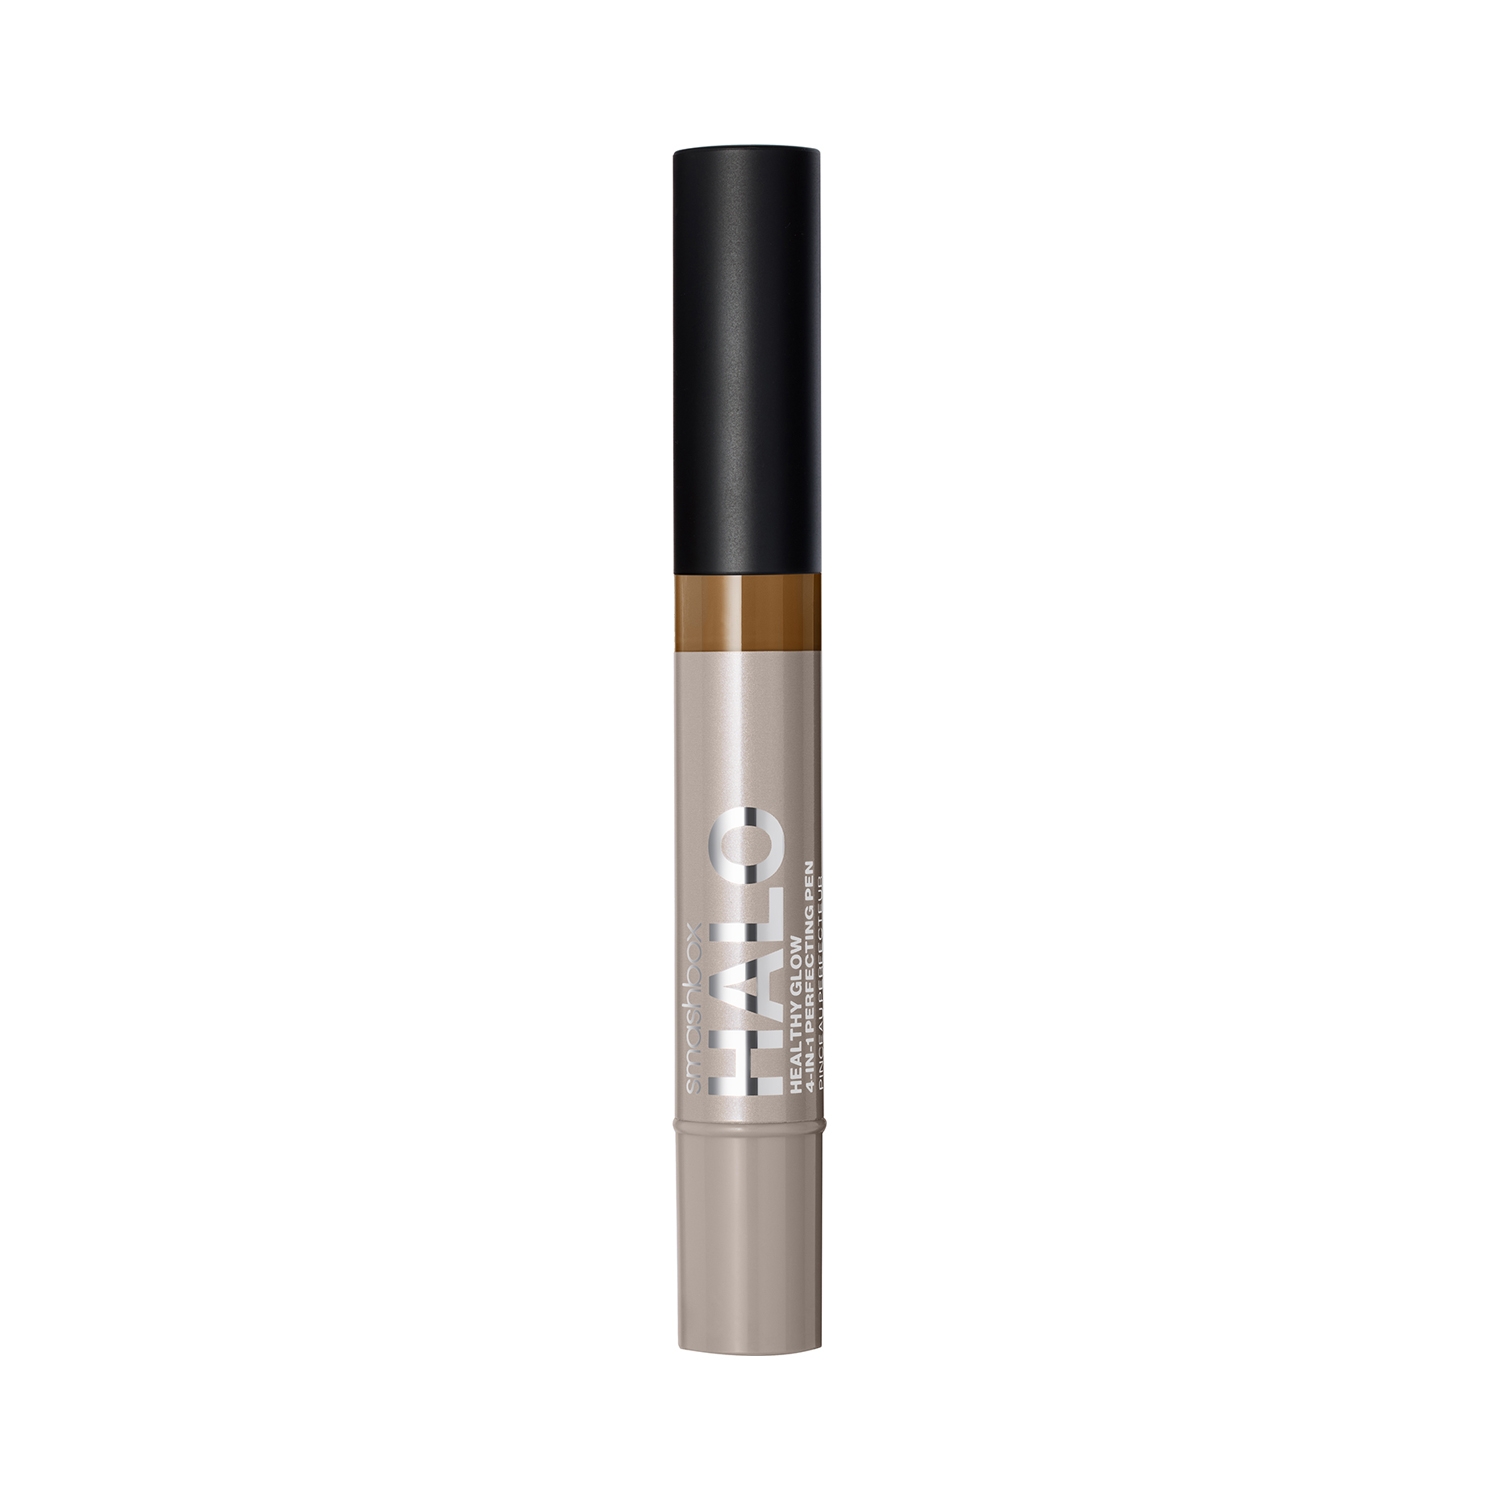 Smashbox | Smashbox Halo Healthy Glow 4-In-1 Perfecting Concealer Pen - T20O (3.5ml)